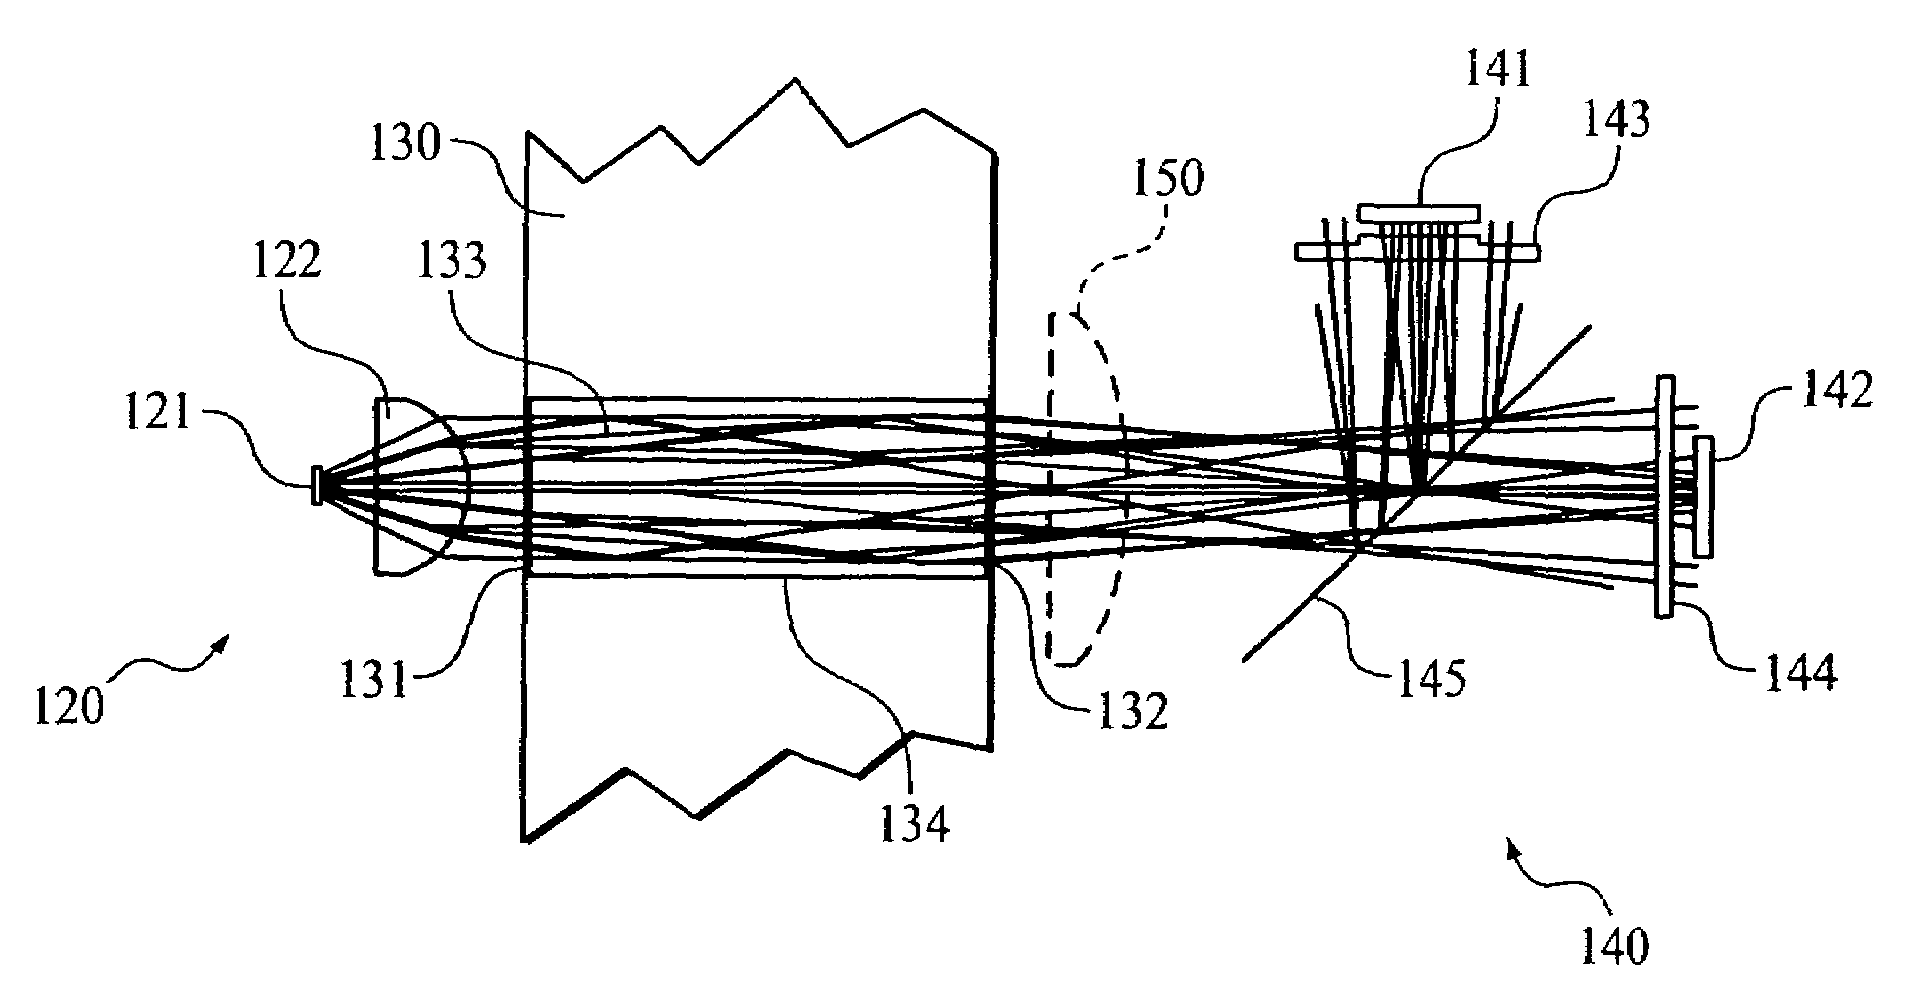 Optical system for a gas measurement system